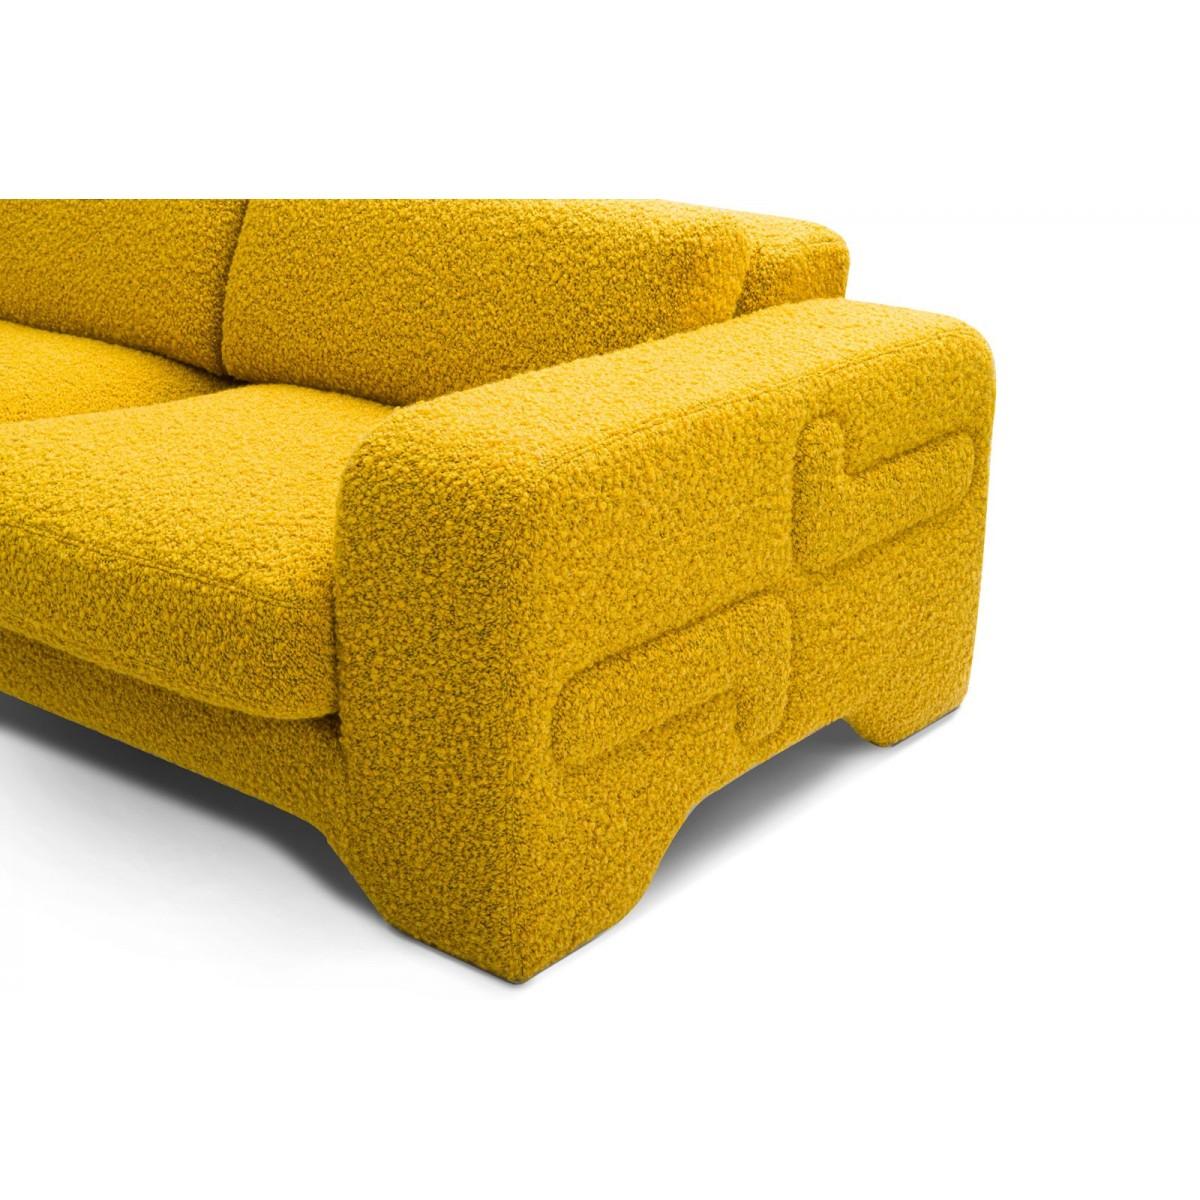 Contemporary Popus Editions Giovanna 4 Seater Sofa in Amber Athena Loop Yarn Fabric For Sale